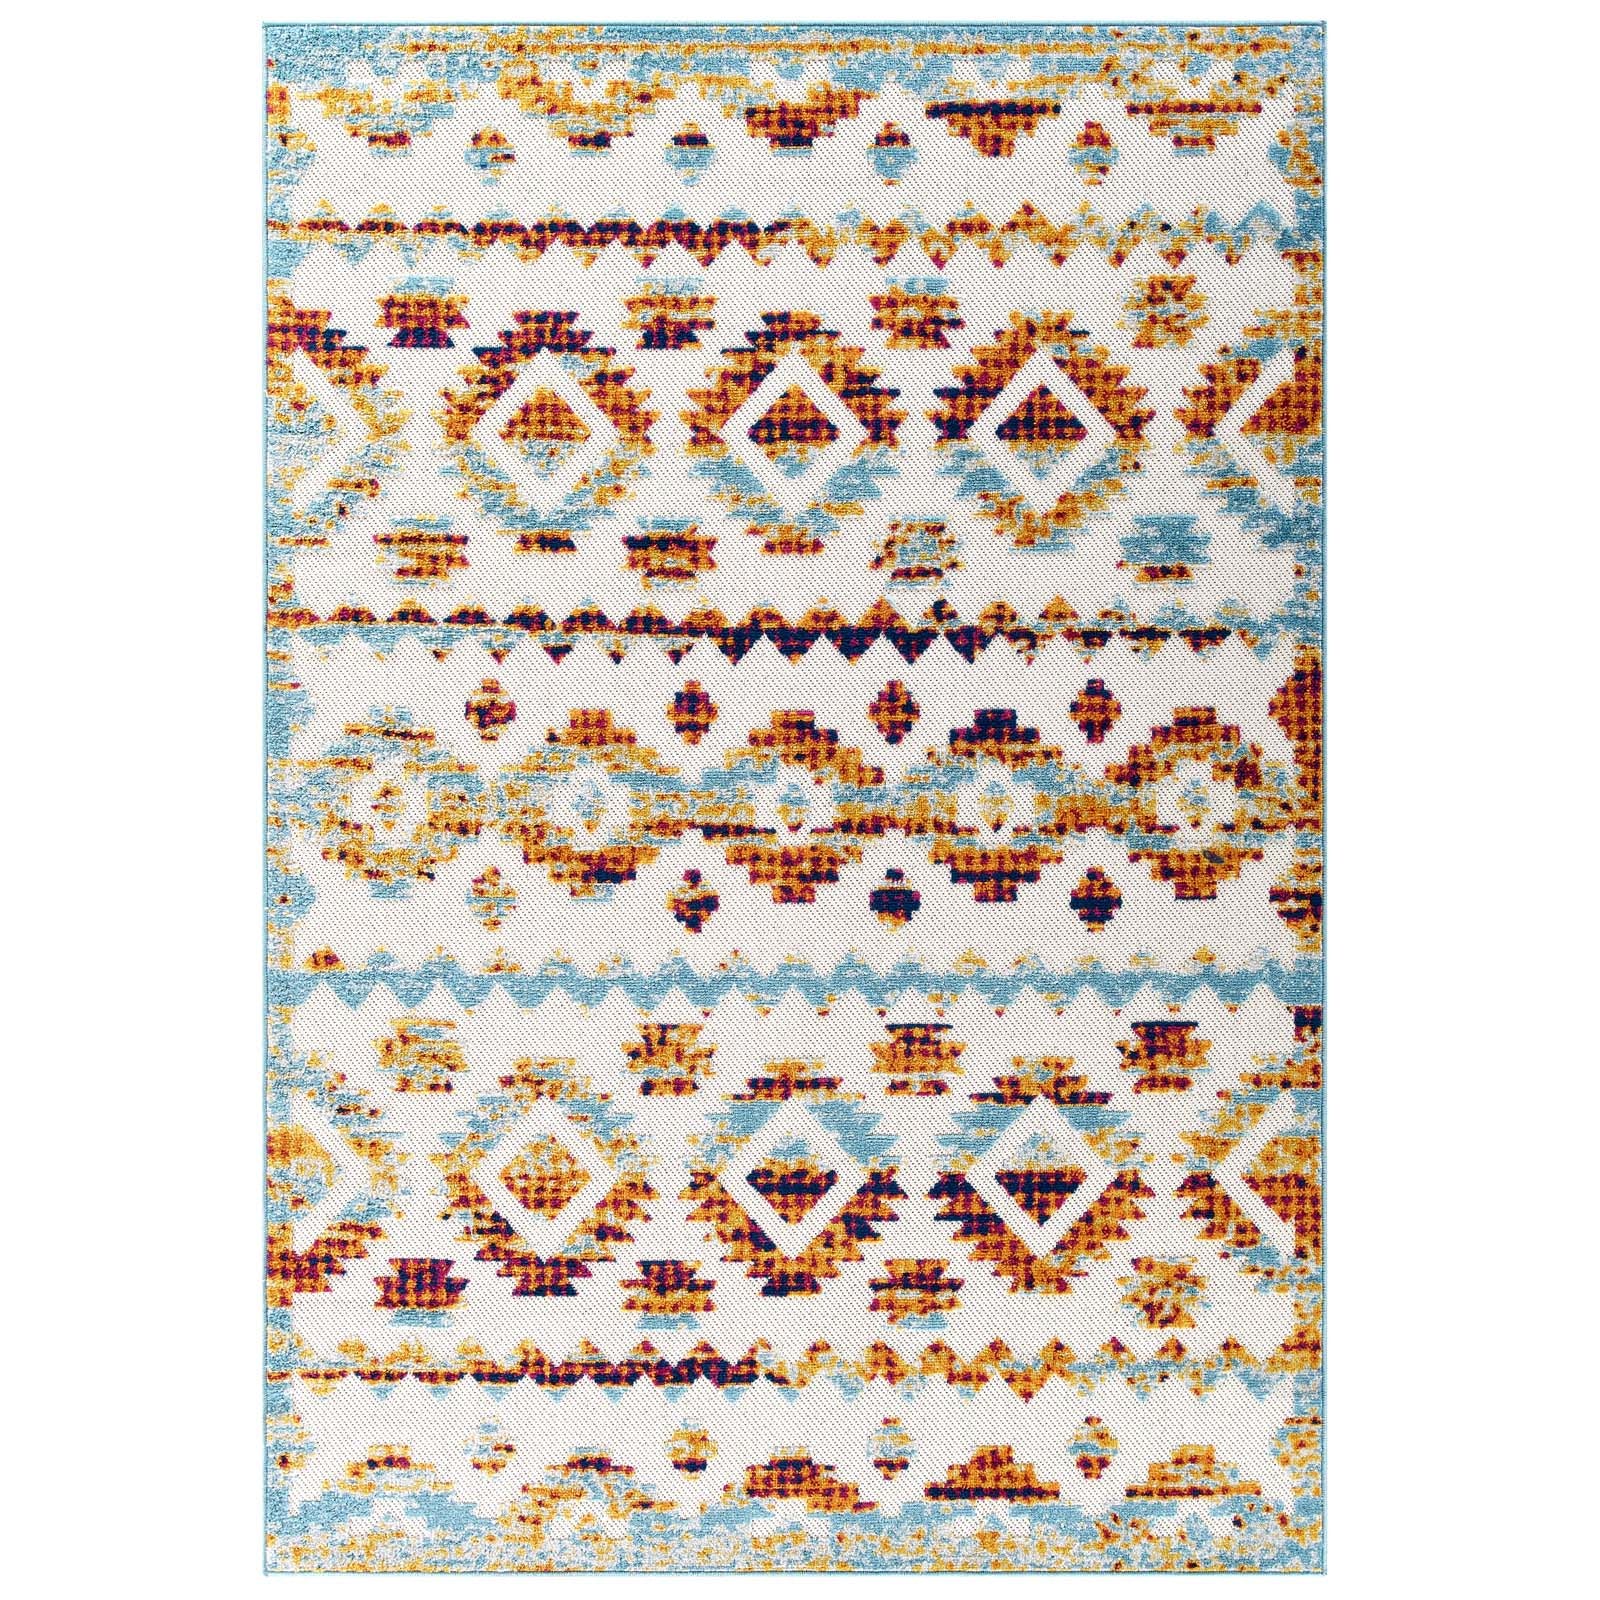 Modway Outdoor Rugs - Reflect Takara Abstract Diamond 8x10 Indoor and Outdoor Area Rug Multicolored